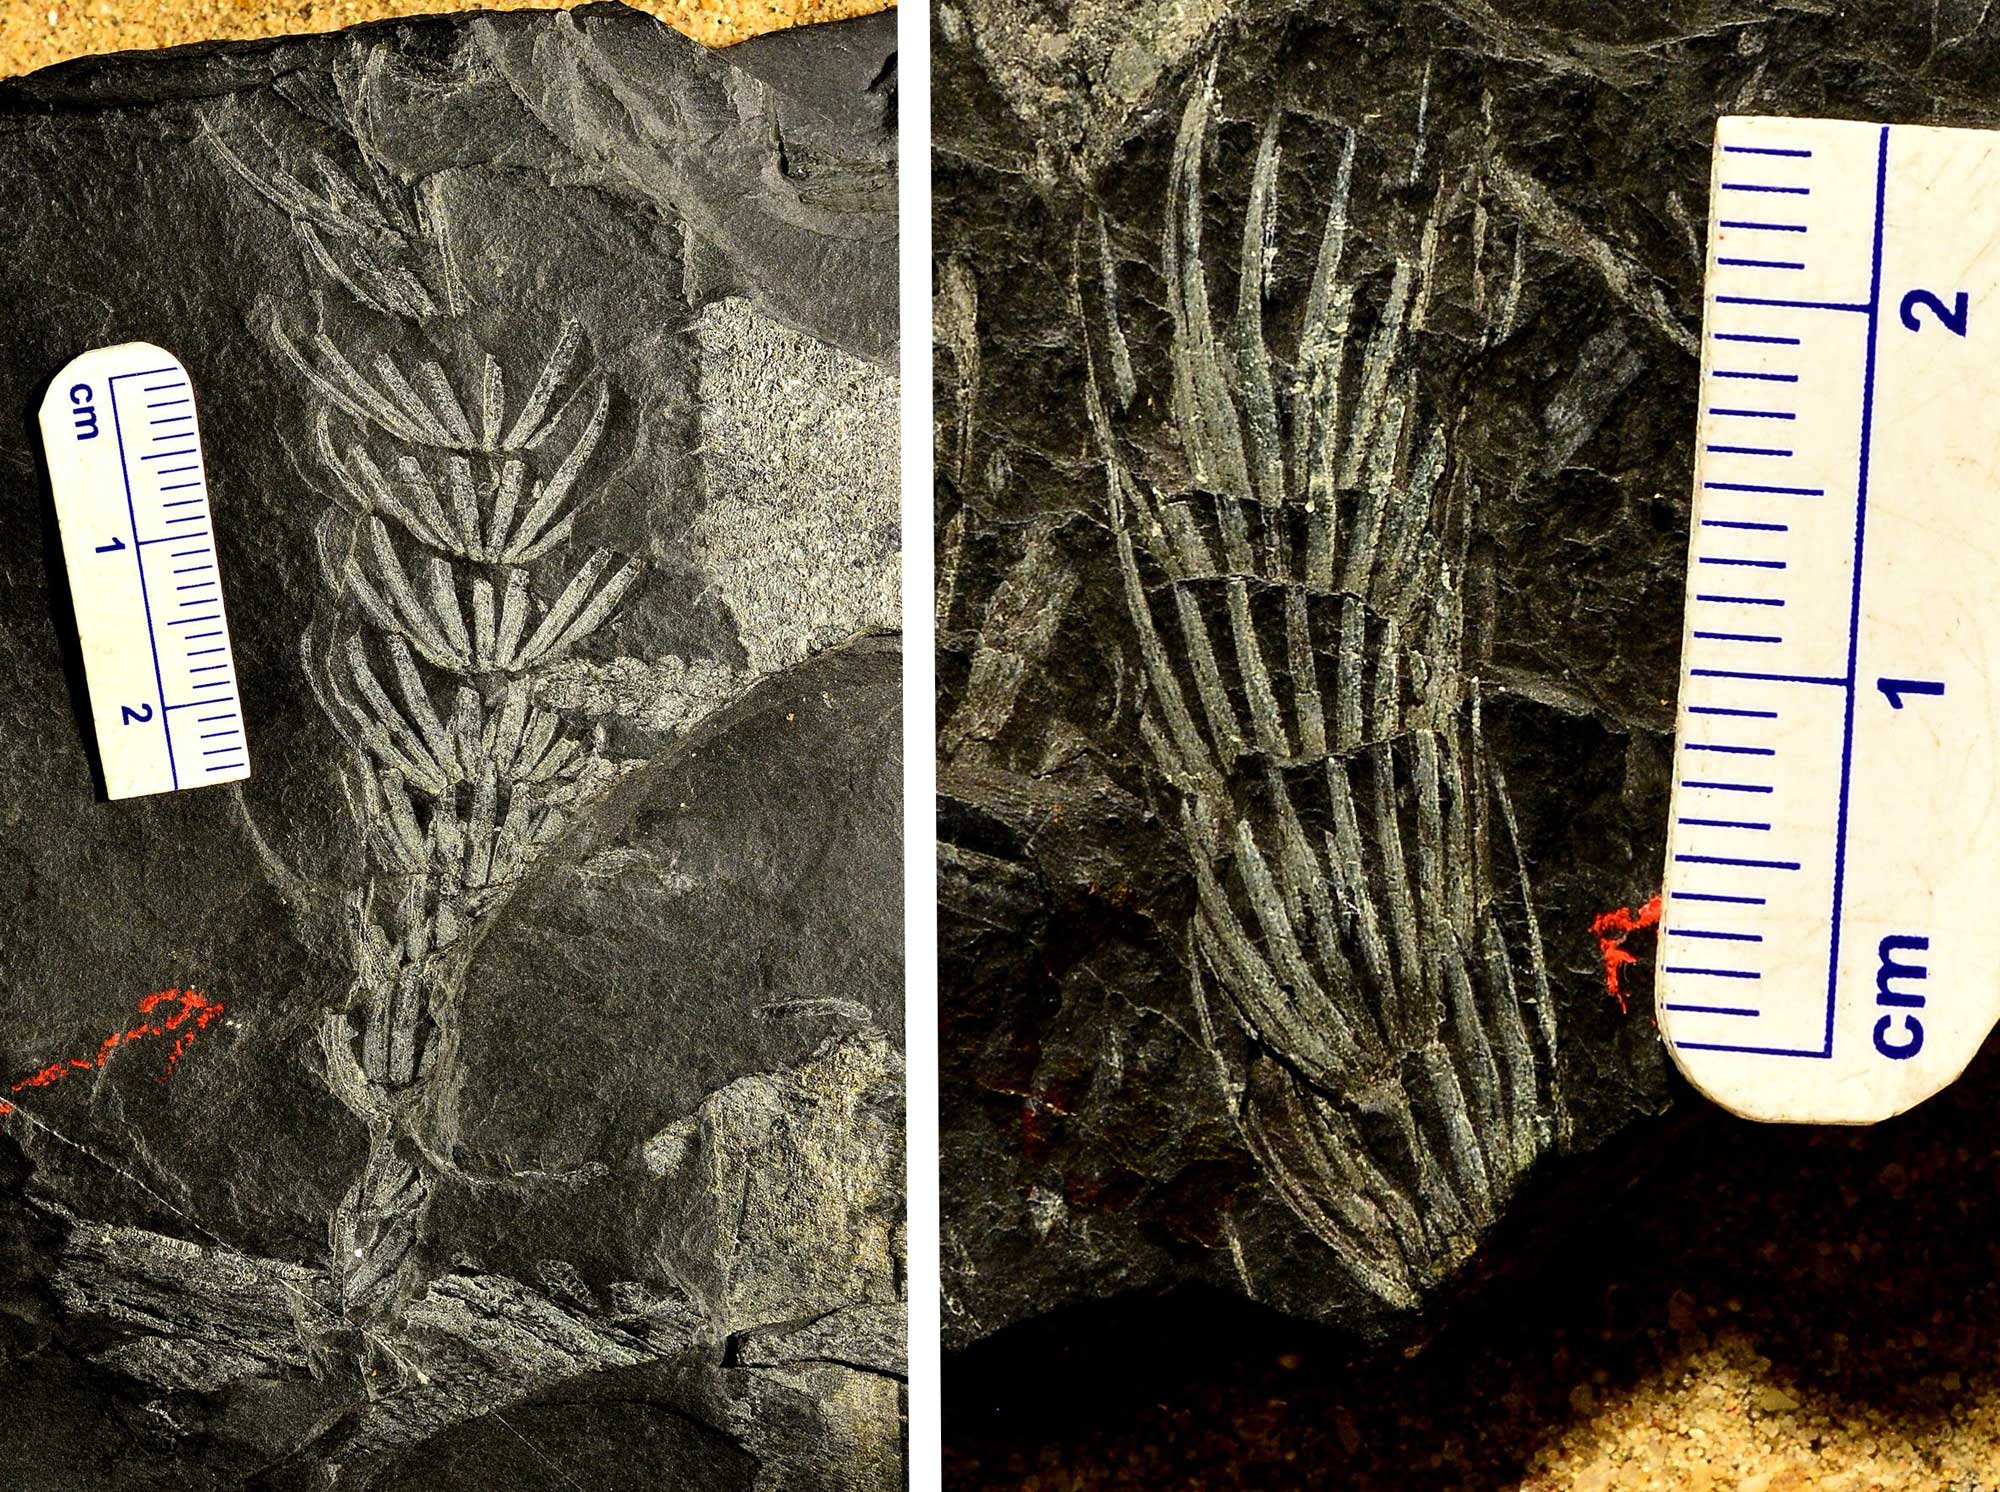 2-panel image showing photographs of Asterophyllites foilage from the Carboniferous of Rhode Island. The photos show whorls of needle-like leaves on thin branches. The fossils are white, whereas the rock is black.